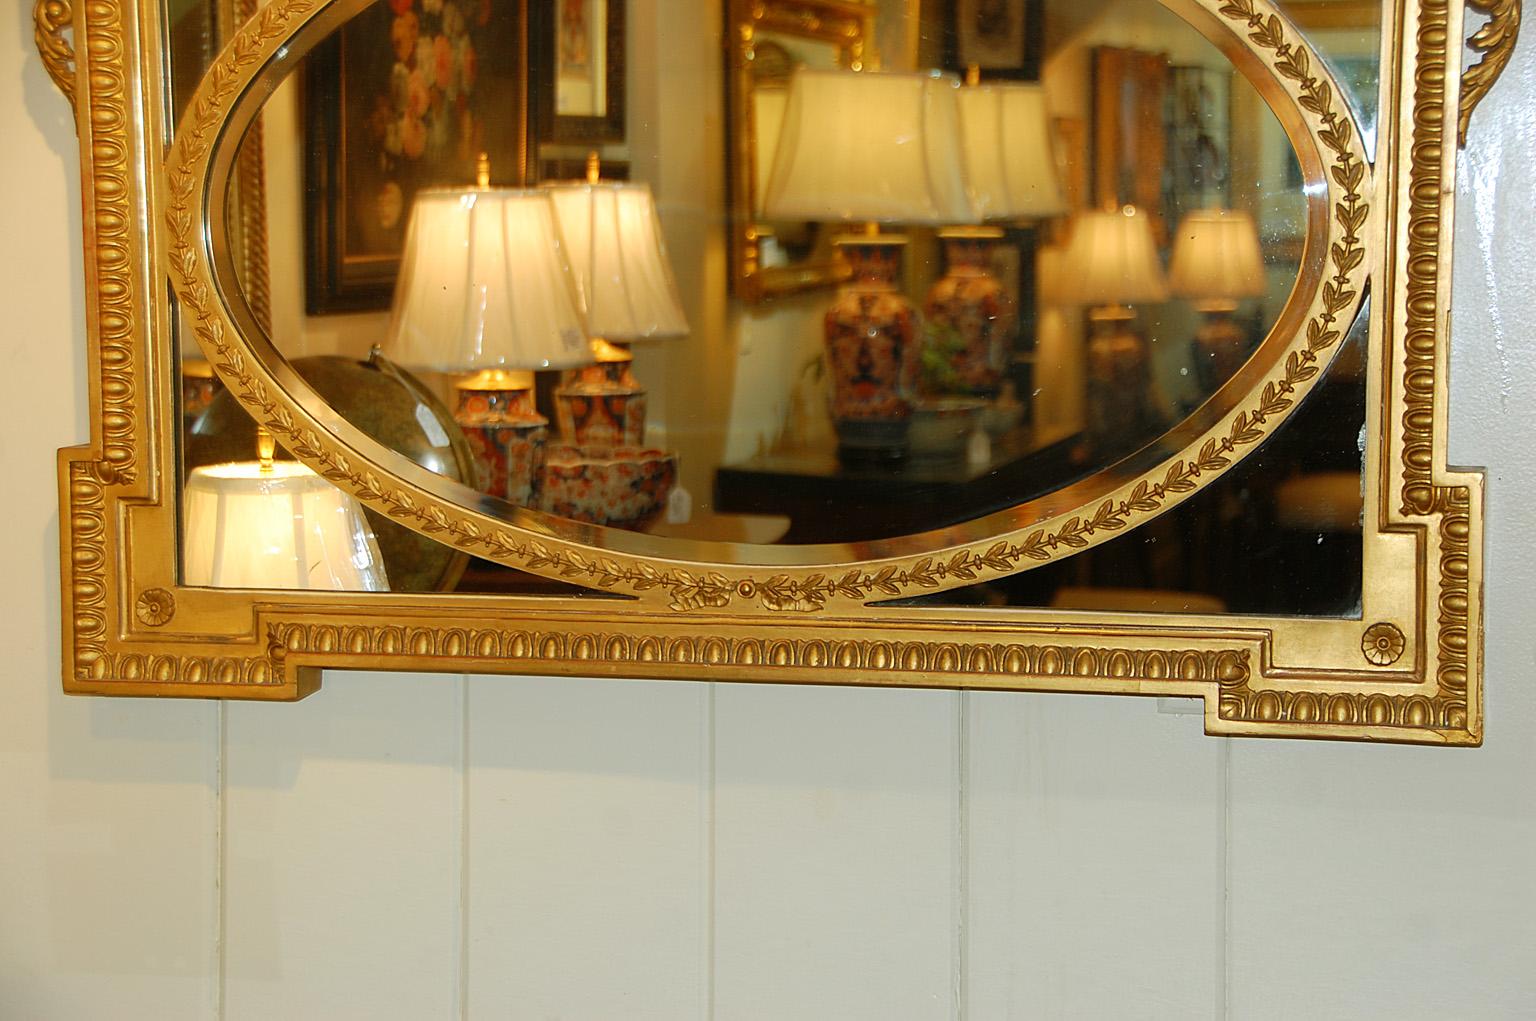 19th Century English Edwardian Gold Mirror with Urn and Trailing Leaves Surmounting the Frame For Sale